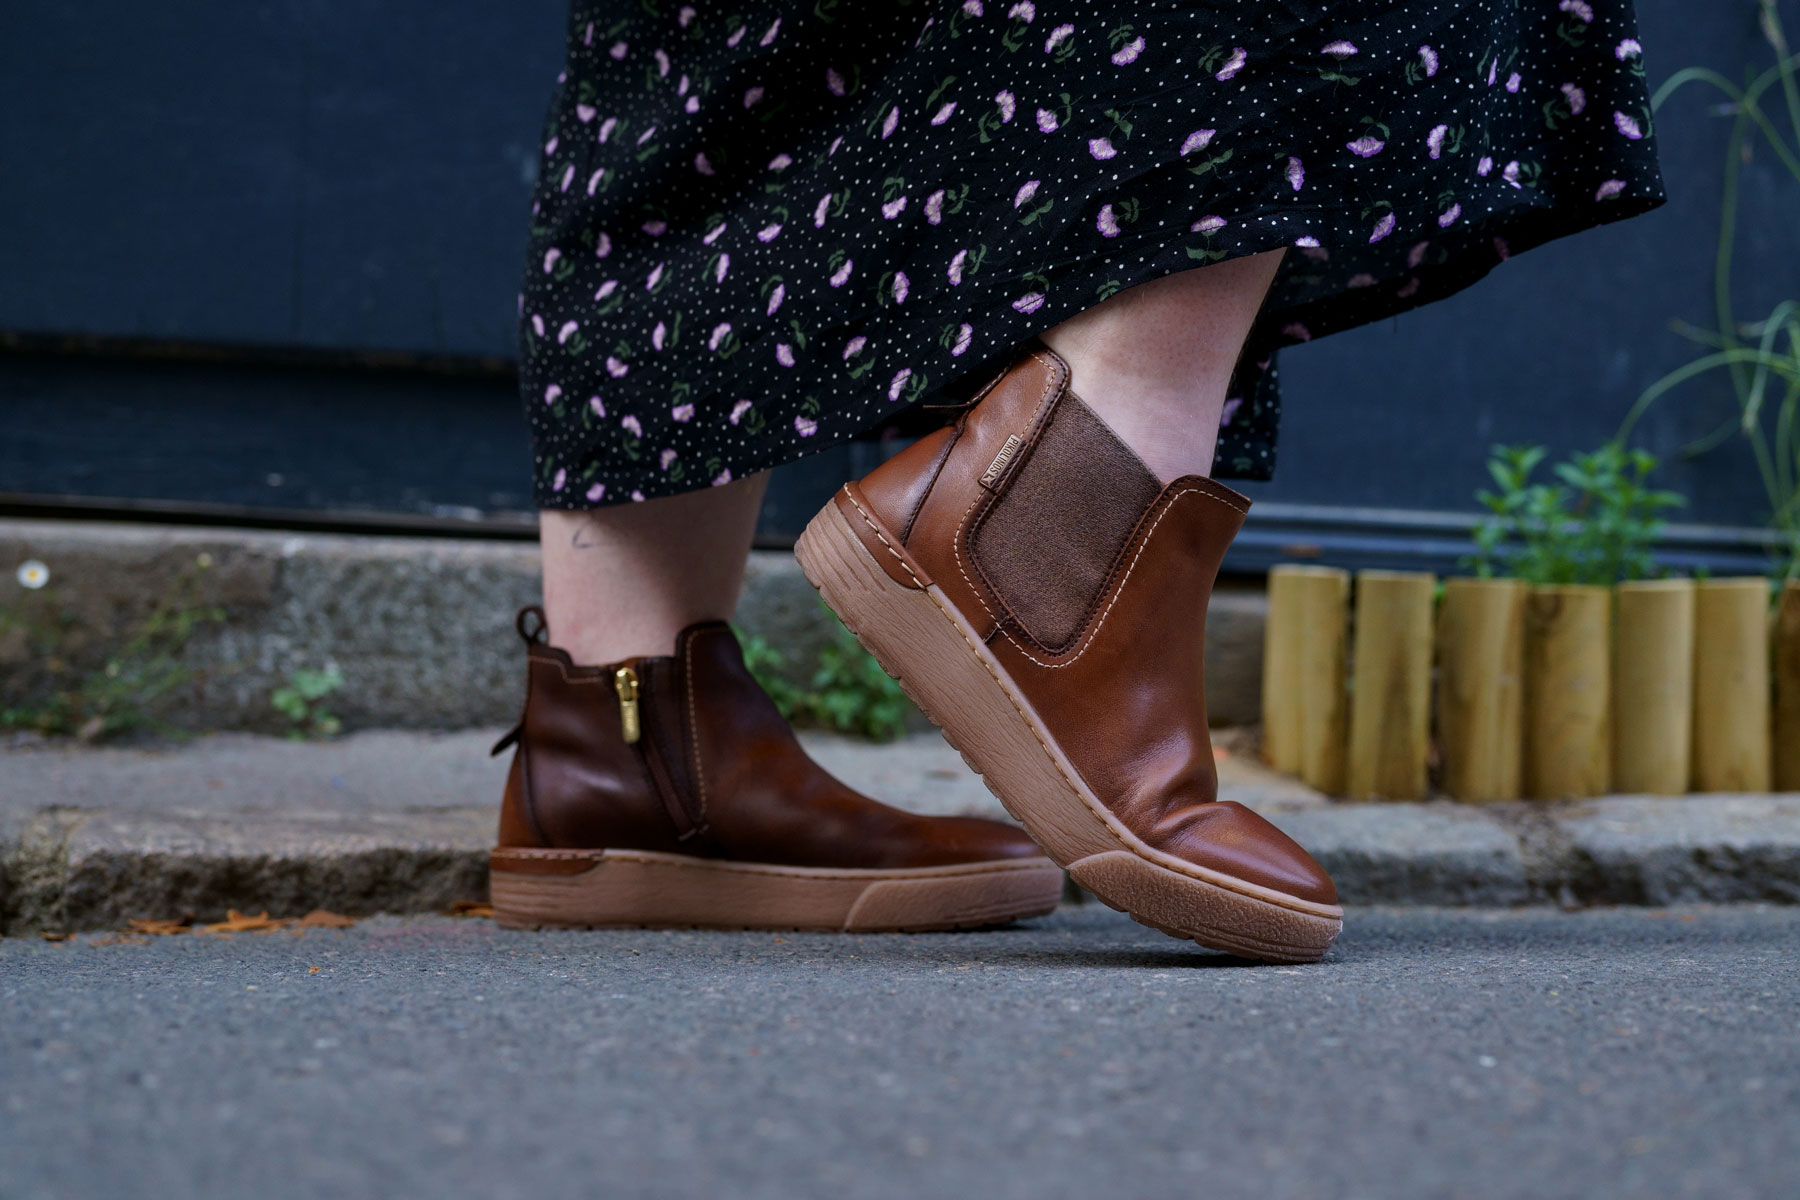 Photograph of Marie's feet with a pair of Pikolinos women's ankle boots.